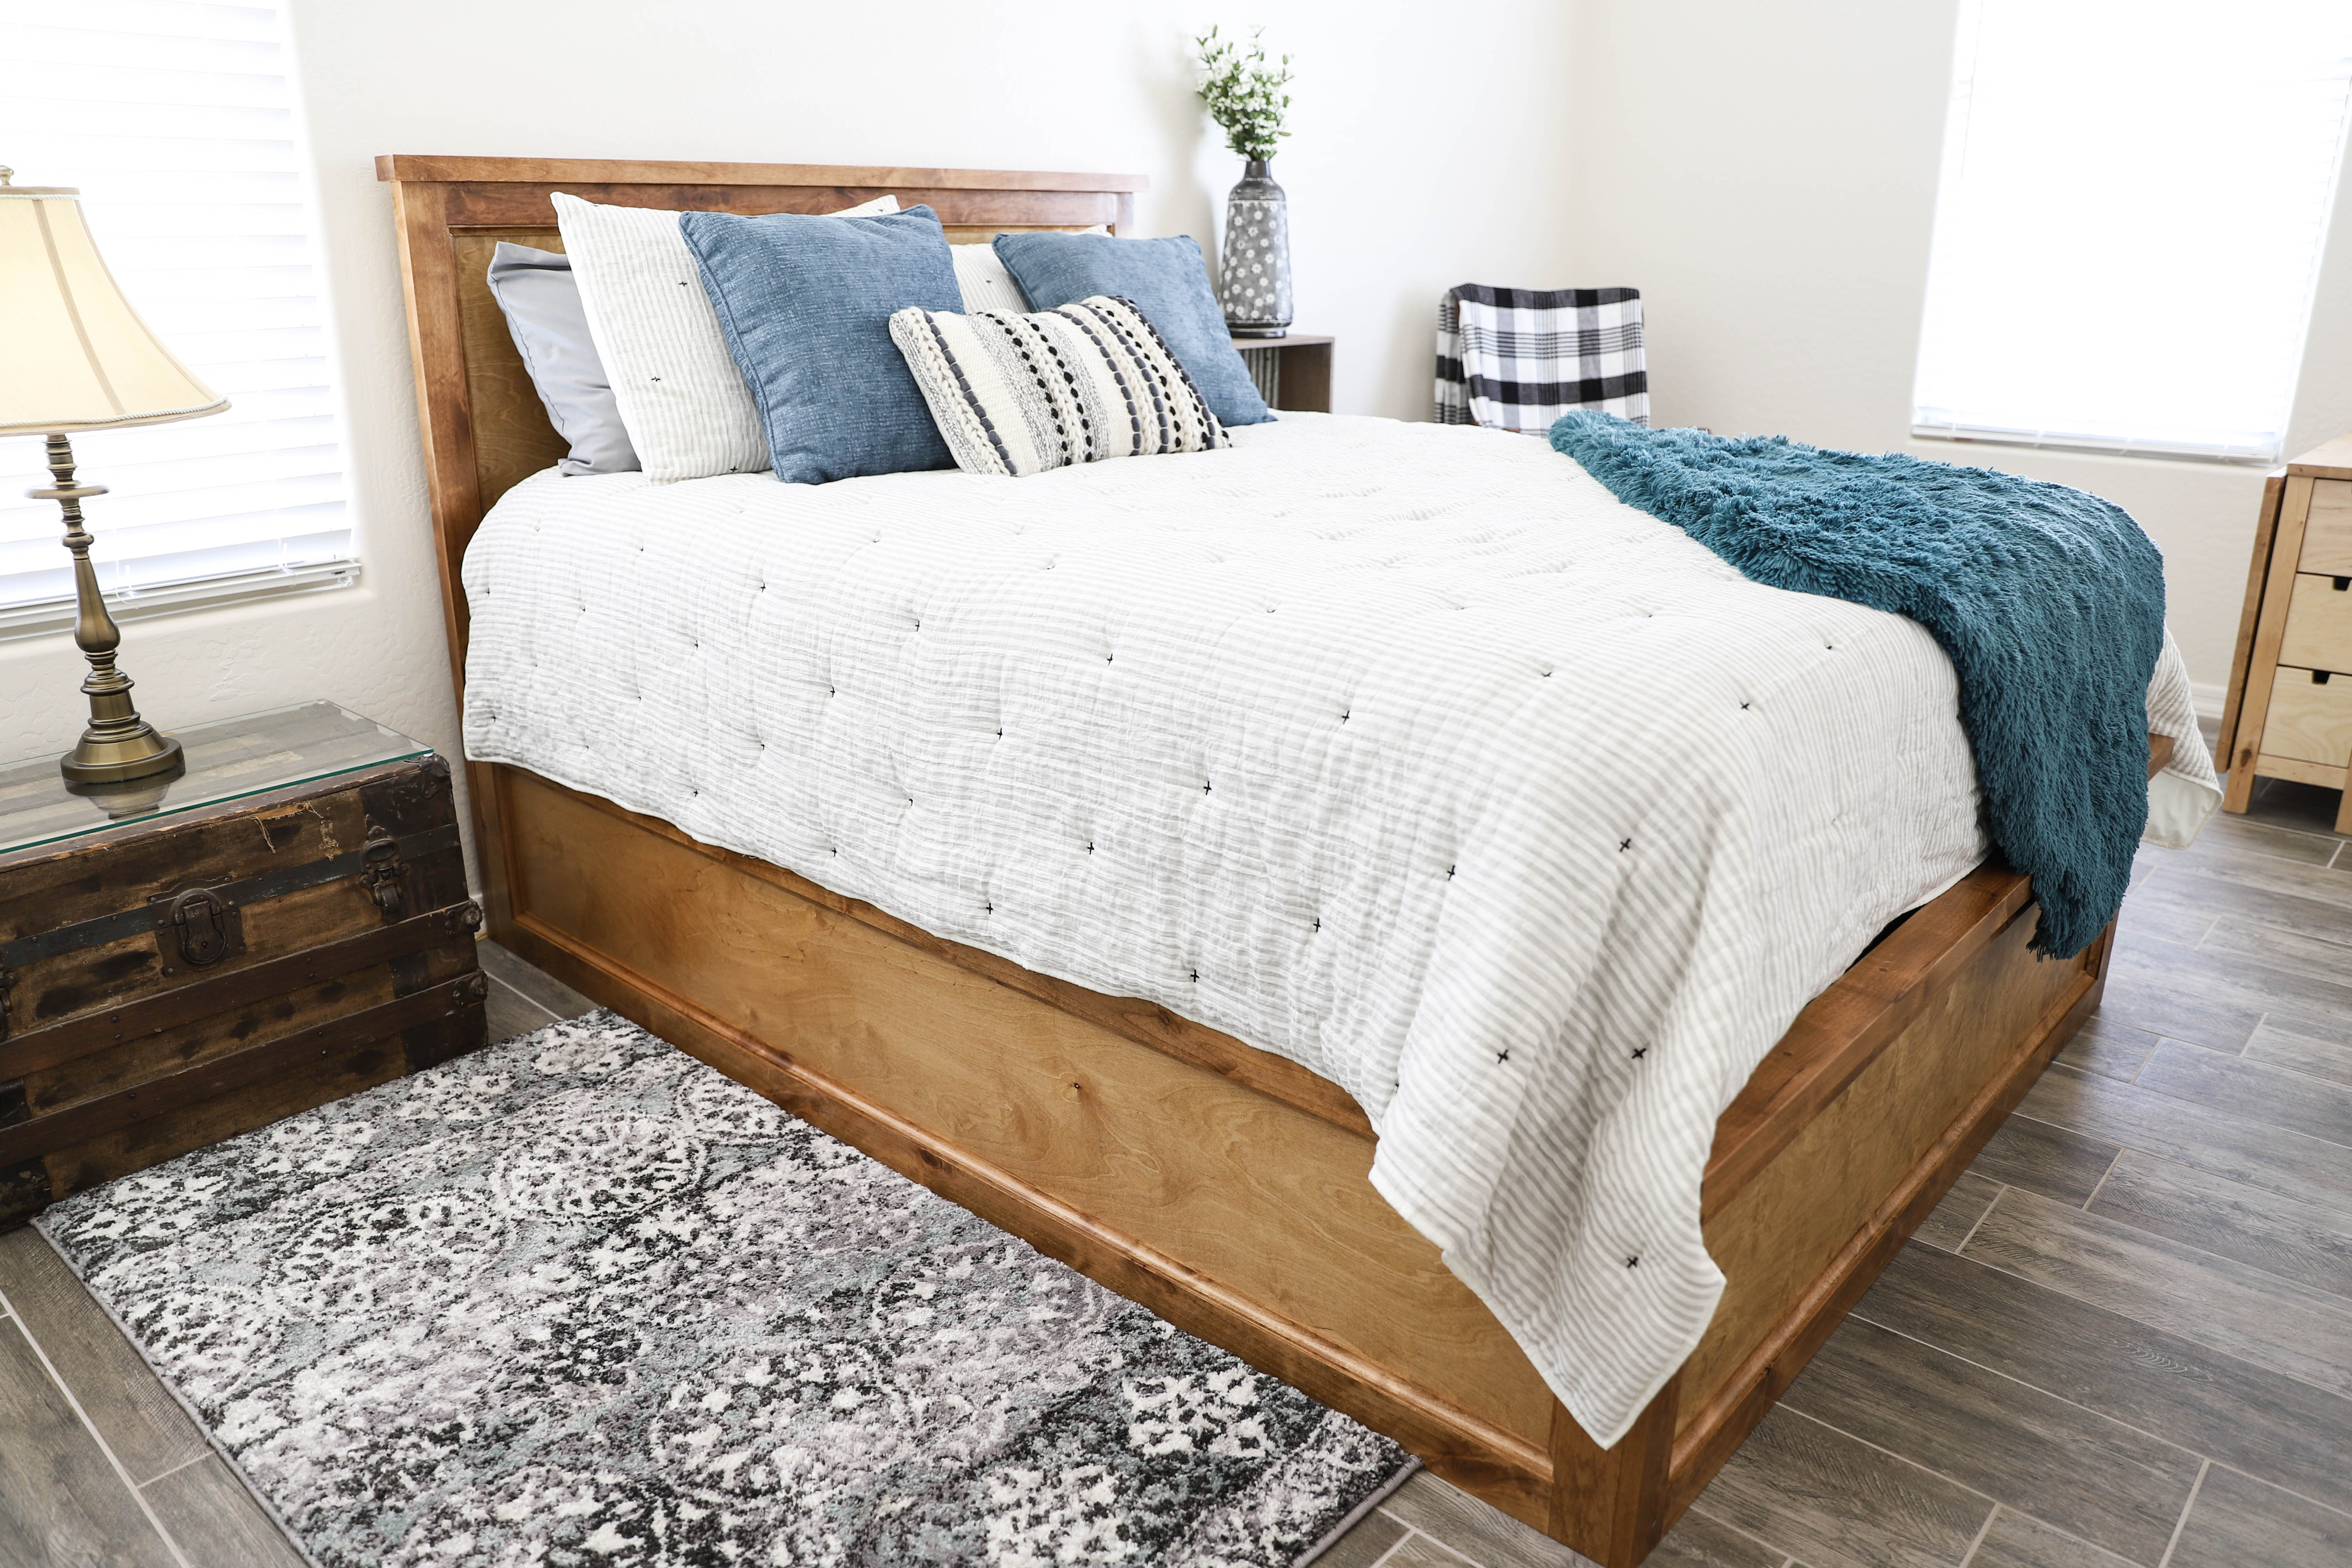 How To Build A Queen Size Storage Bed, How To Build A Queen Size Wood Bed Frame